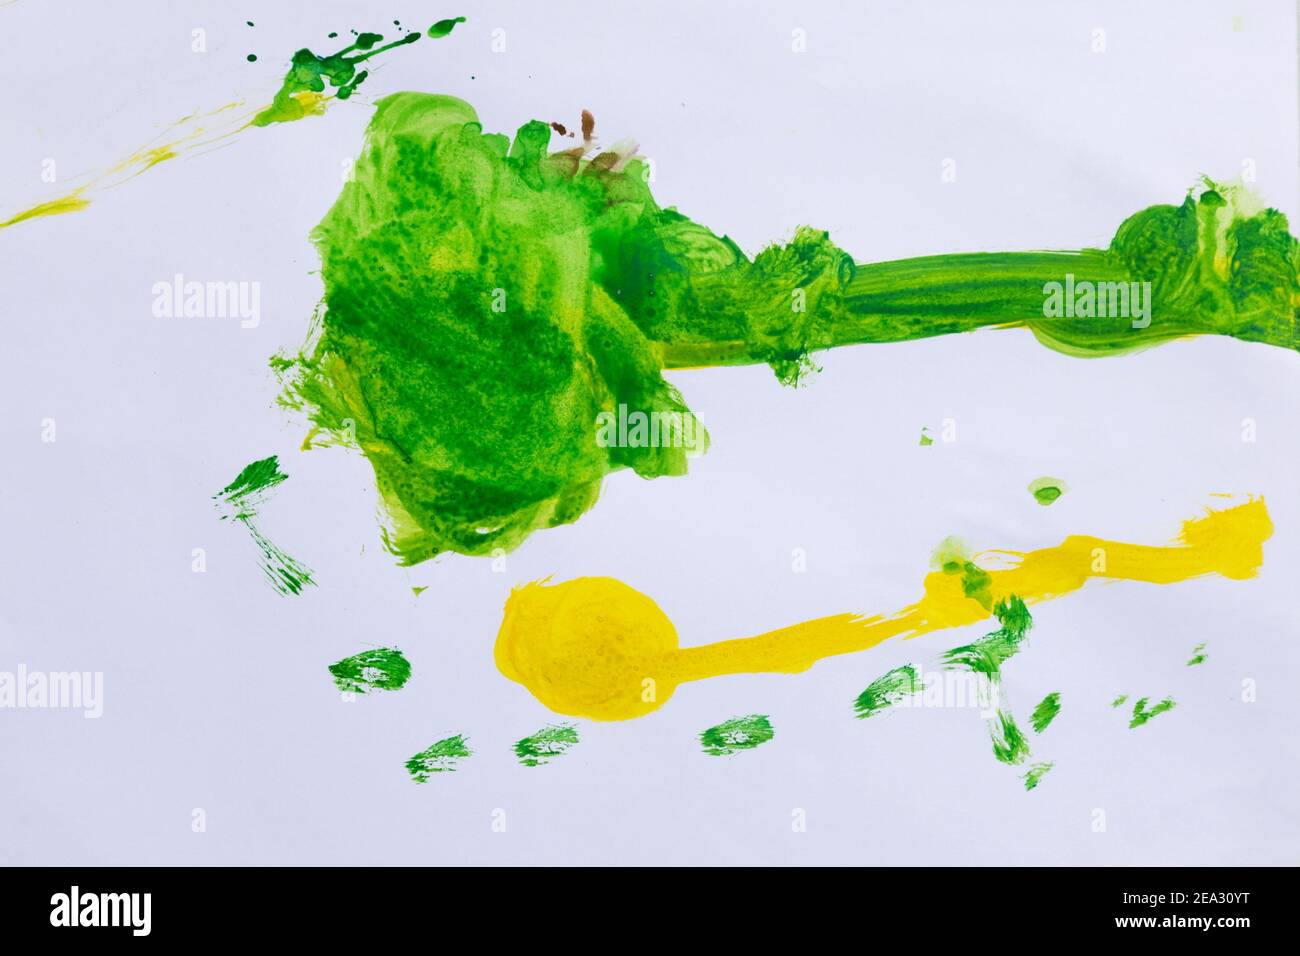 Spots of yellow and green. Watercolor drawing abstraction Stock Photo